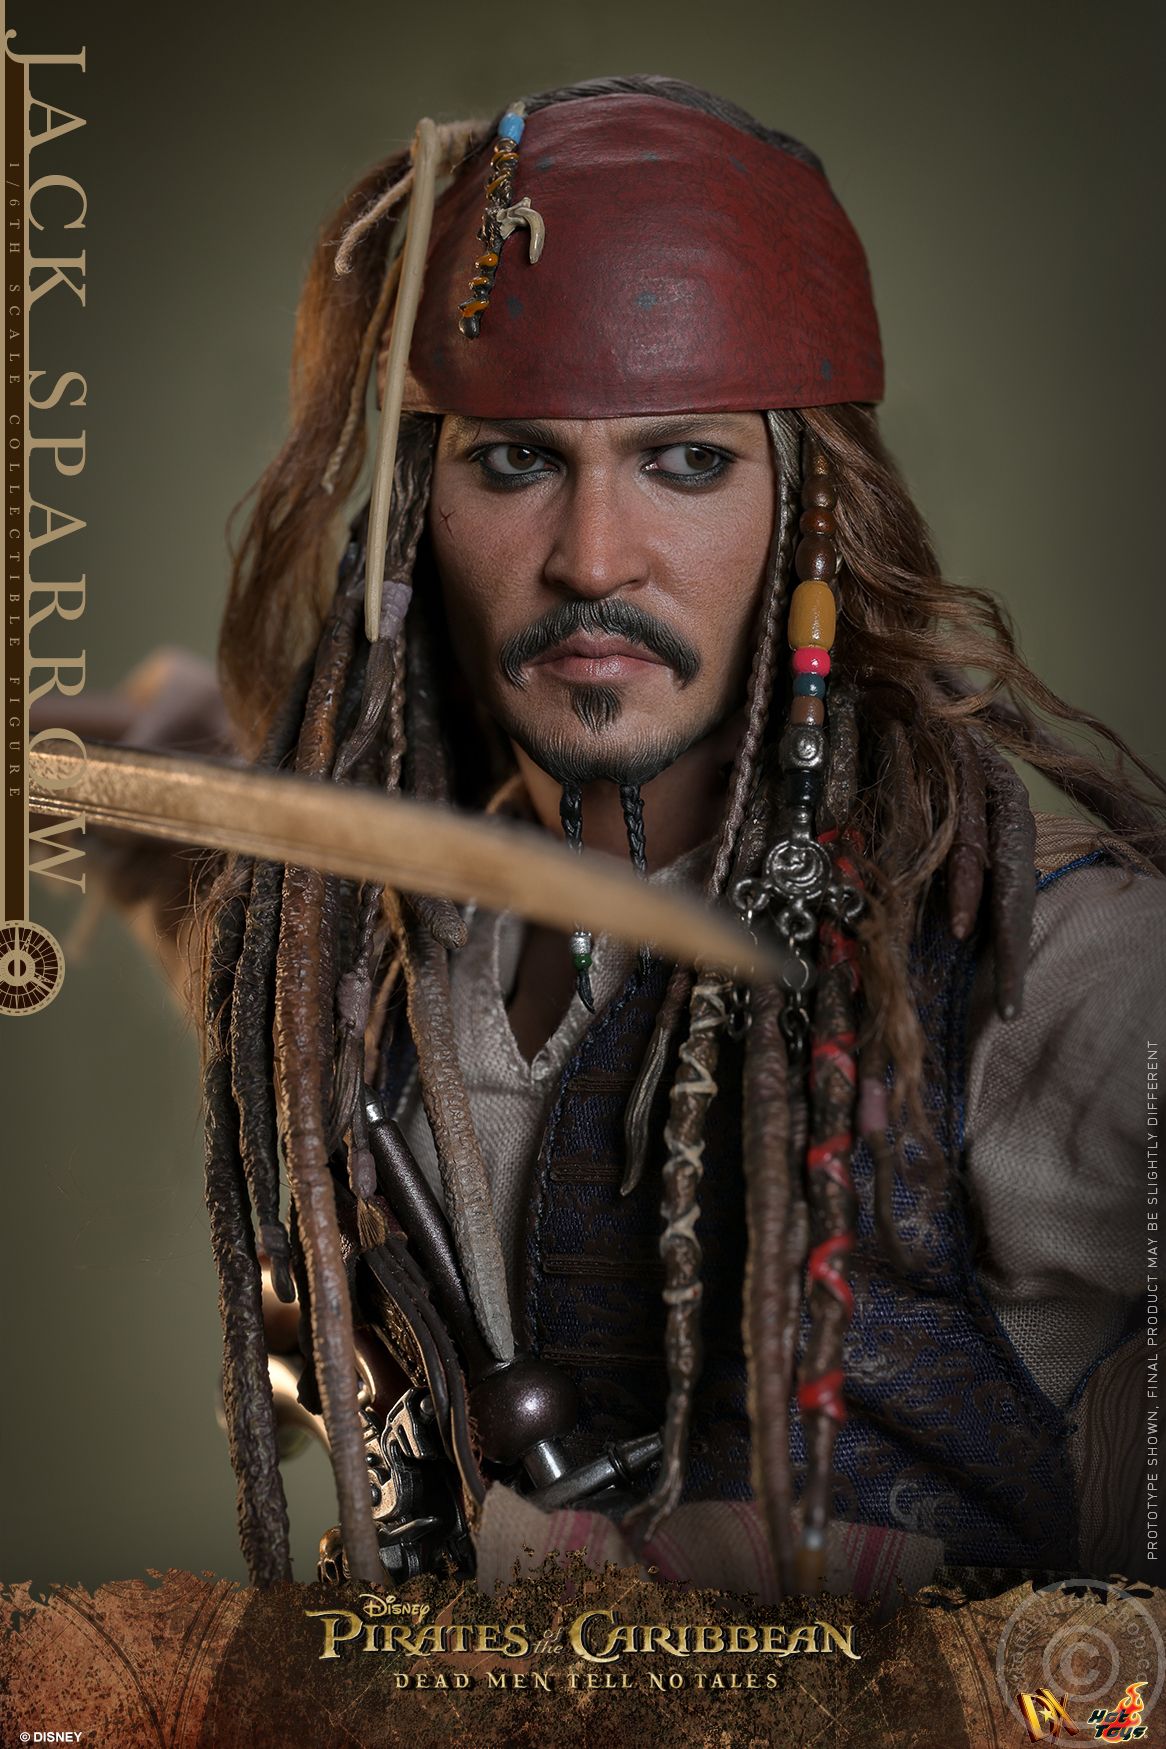 Jack Sparrow - Pirates of the Caribbean - Standard Version